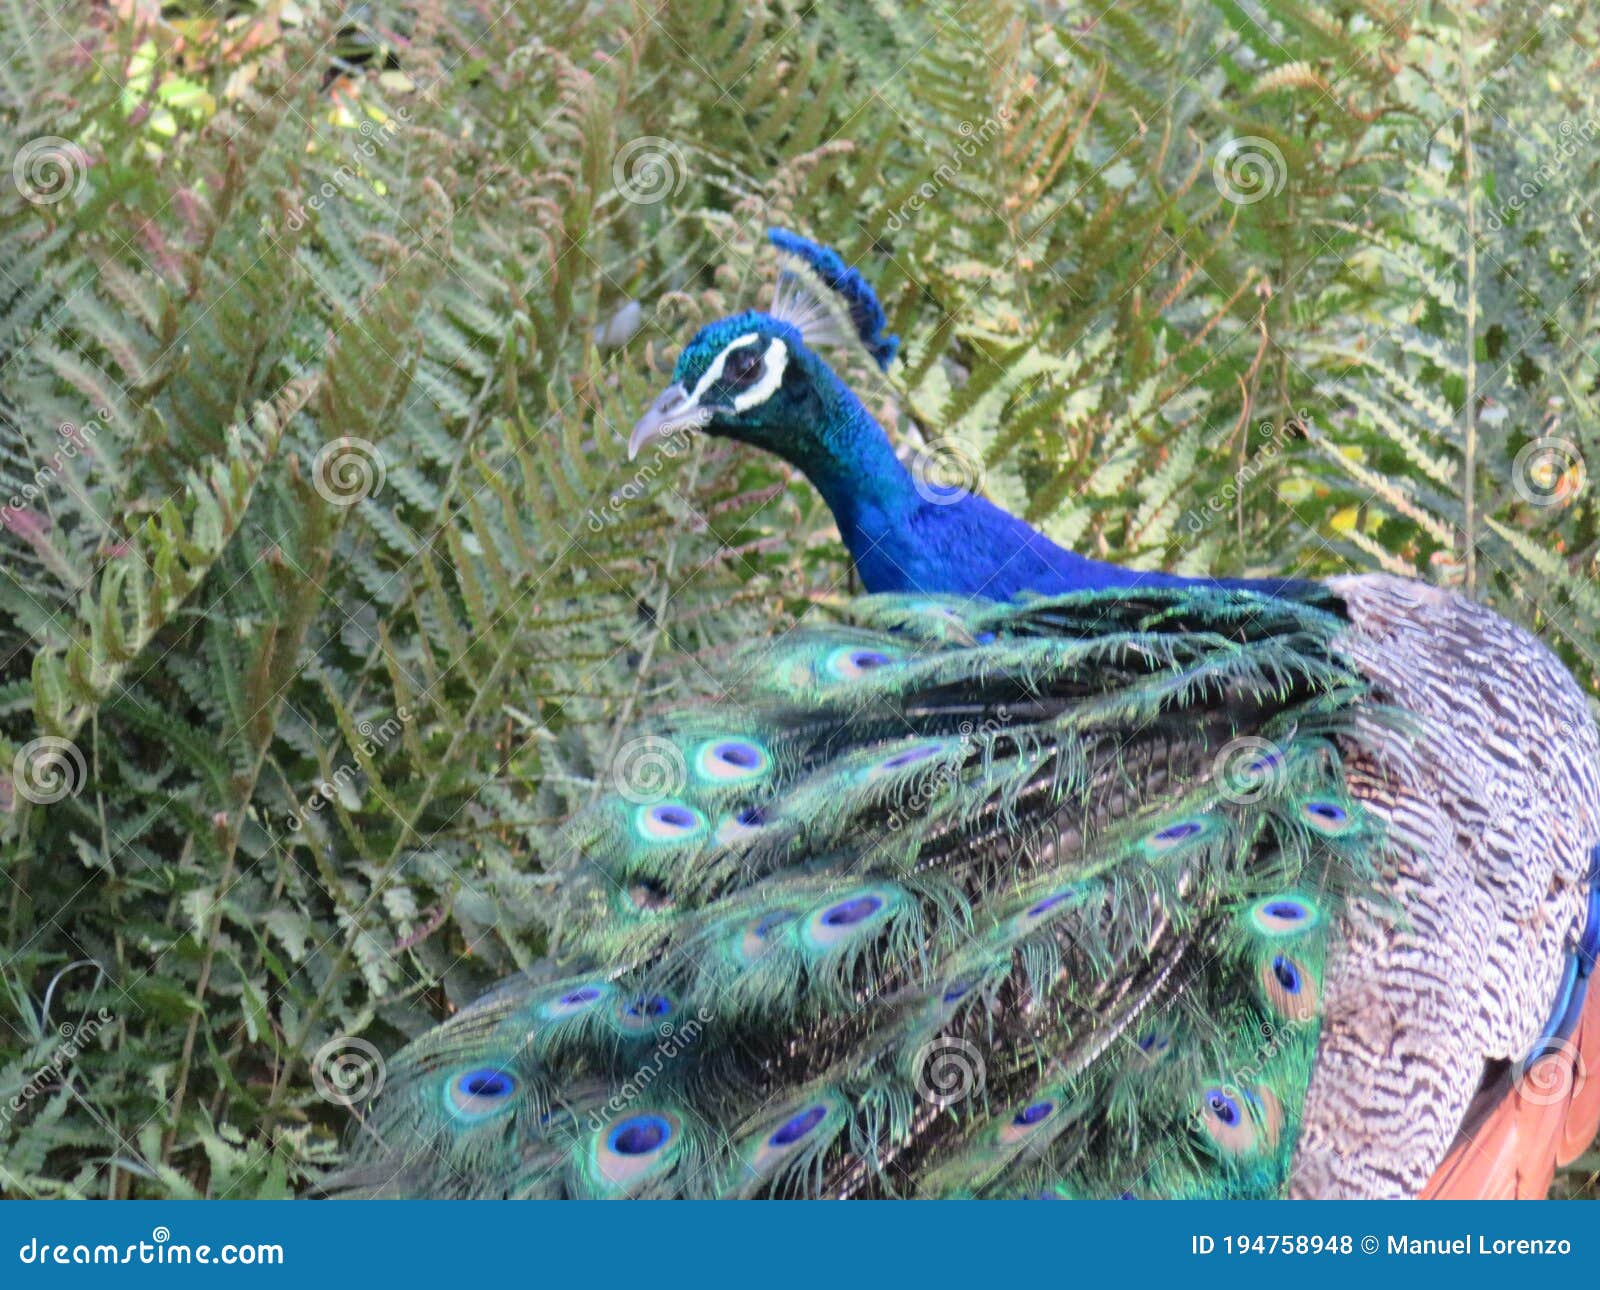 beautiful peacock of fantastic bright colors of long feathers